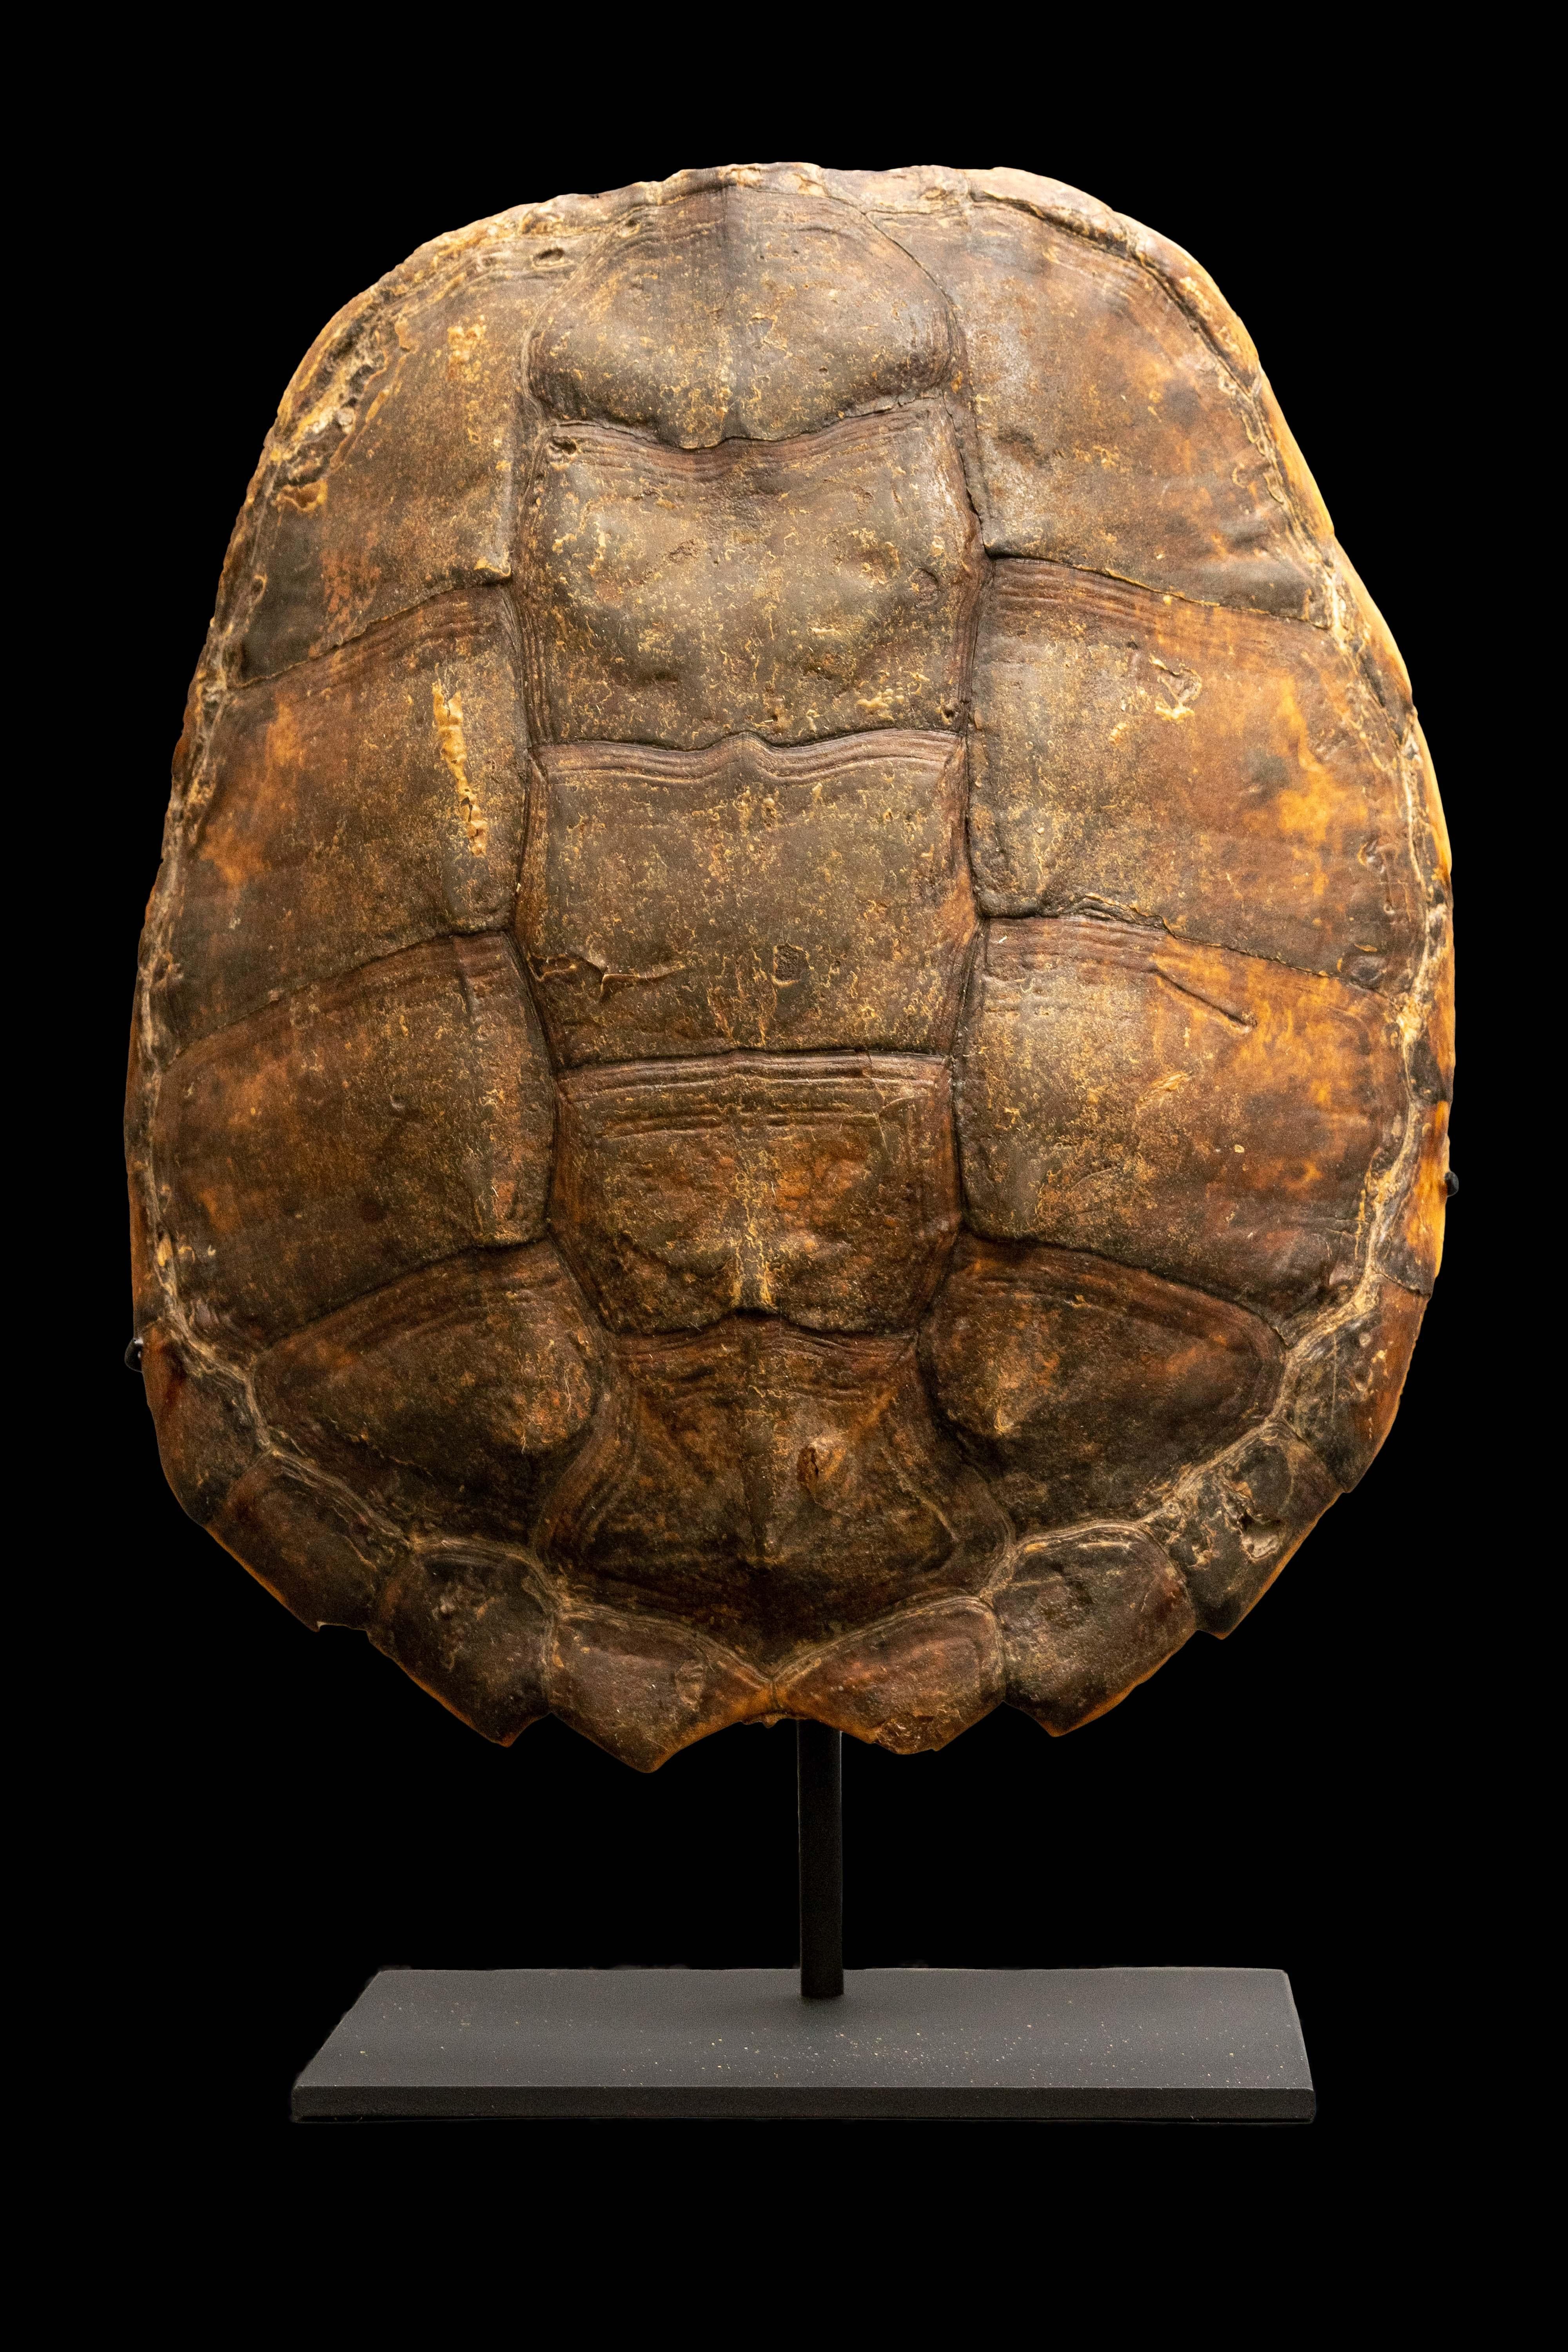 Mounted snapping turtle shell

Measures approximately: 6 x 12 x 16.5.